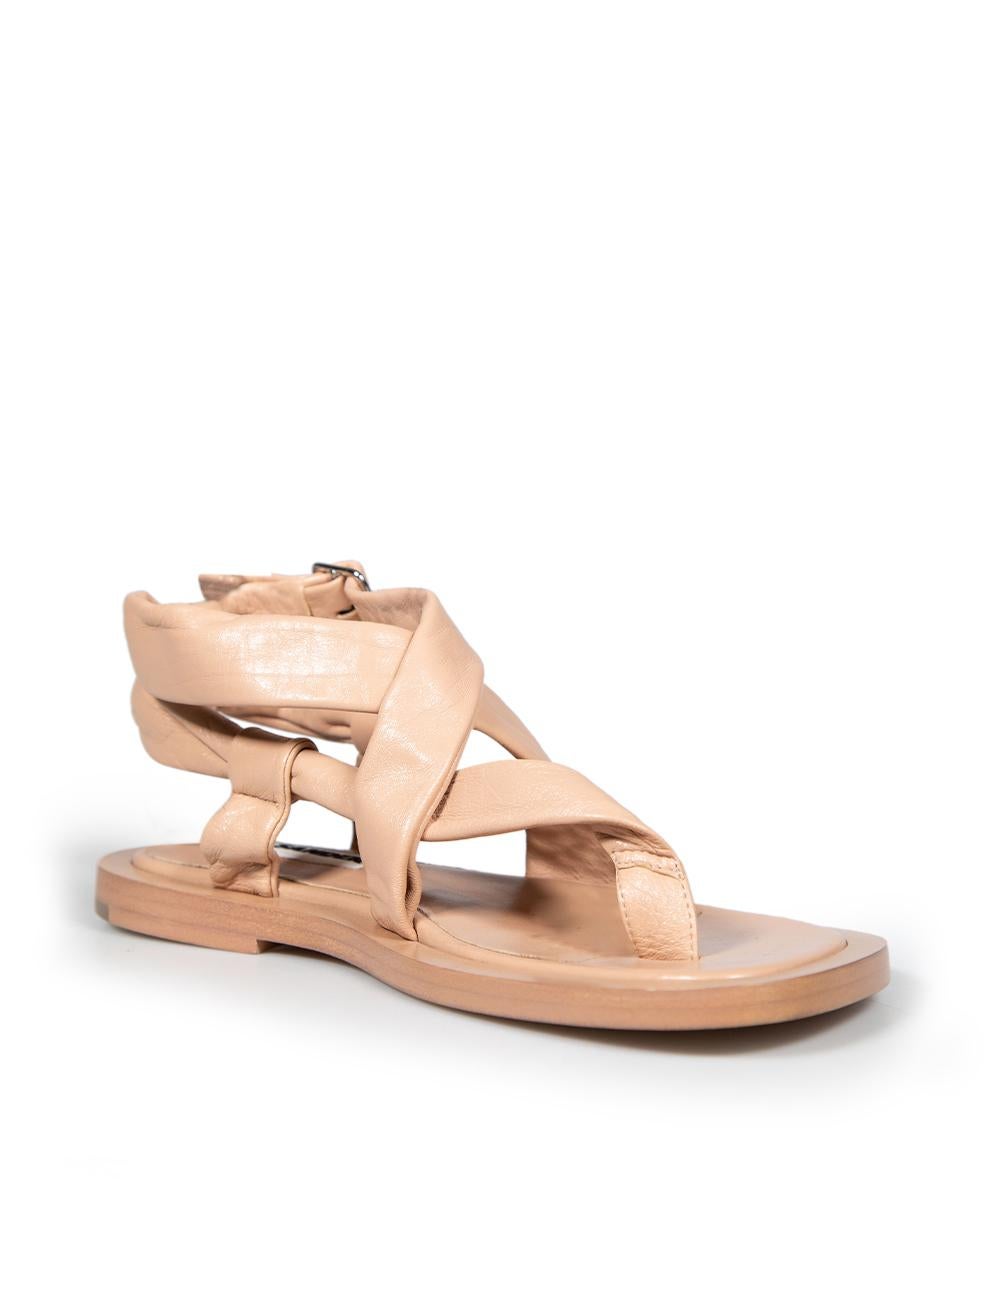 CONDITION is Very good. Minimal wear to sandals is evident. Minimal wear to the sandals is seen on the edges with abrasion marks and a discolouration mark on the back of the right sandal with general creasing of the leather on top on this used Jil